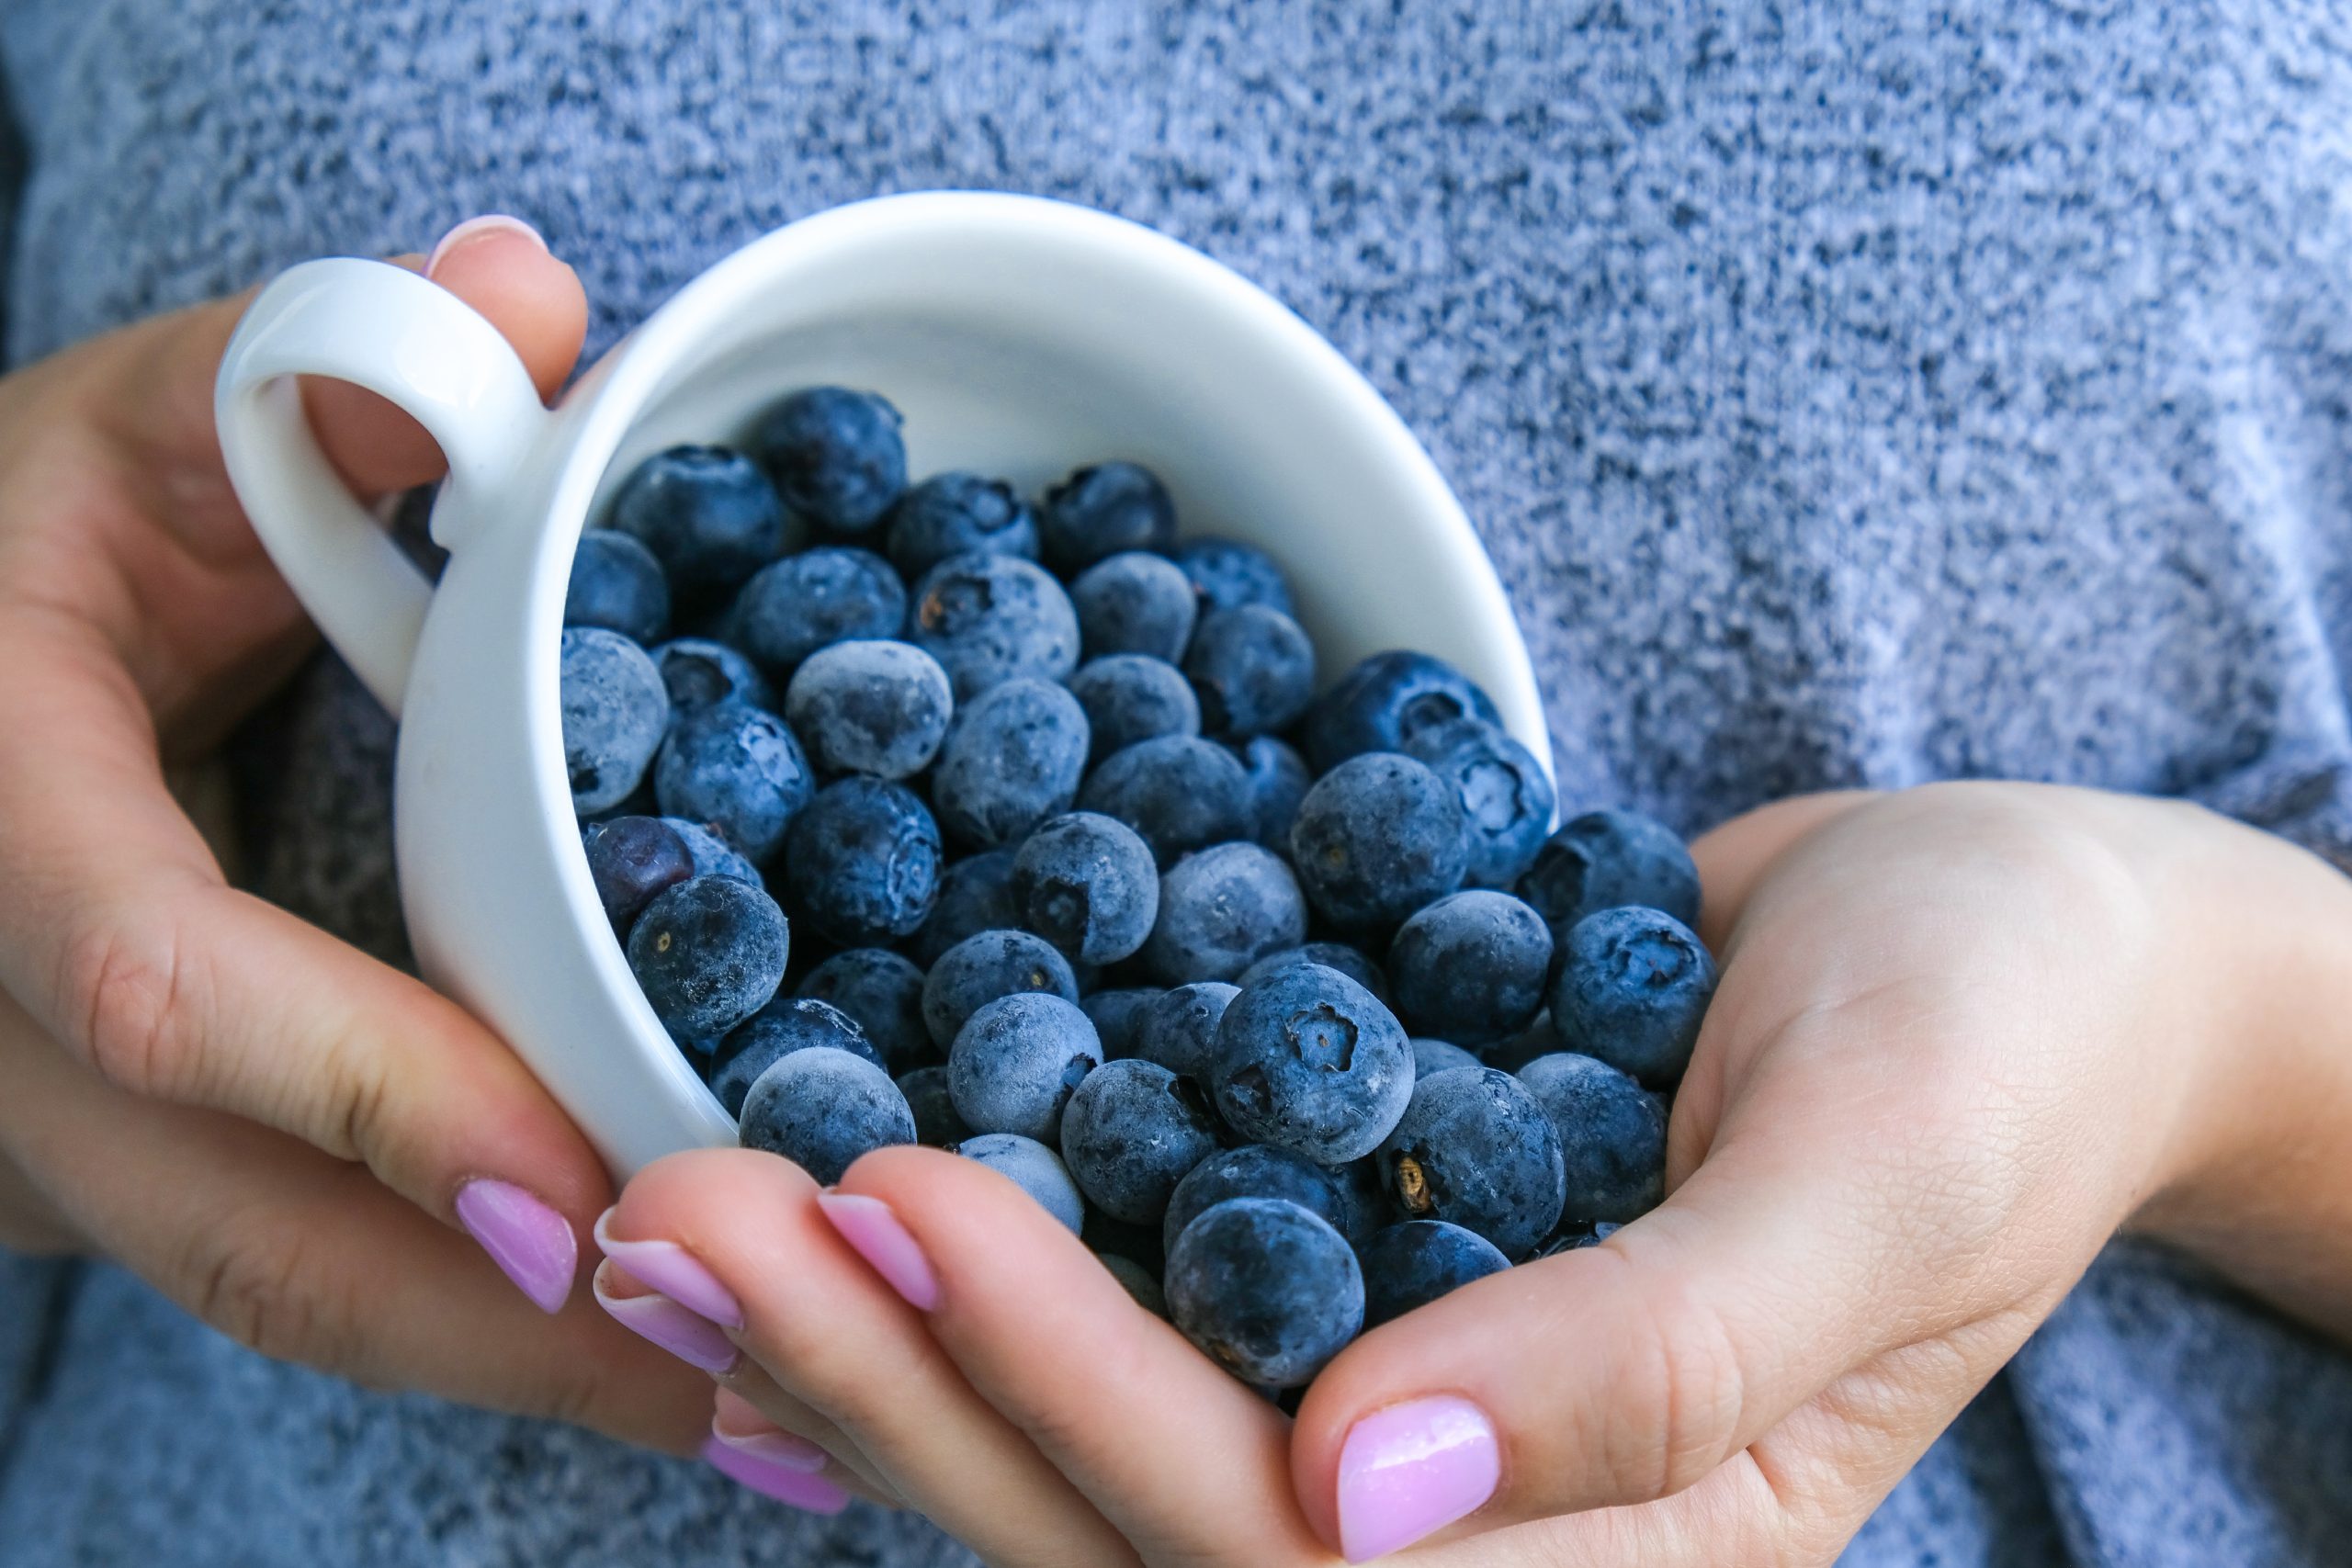 woman-holding-bowl-with-frozen-blueberry-fruits-harvesting-concept-female-hands-collecting-berries-healthy-eating-concept-stocking-up-berries-for-winter-vegetarian-vegan-food